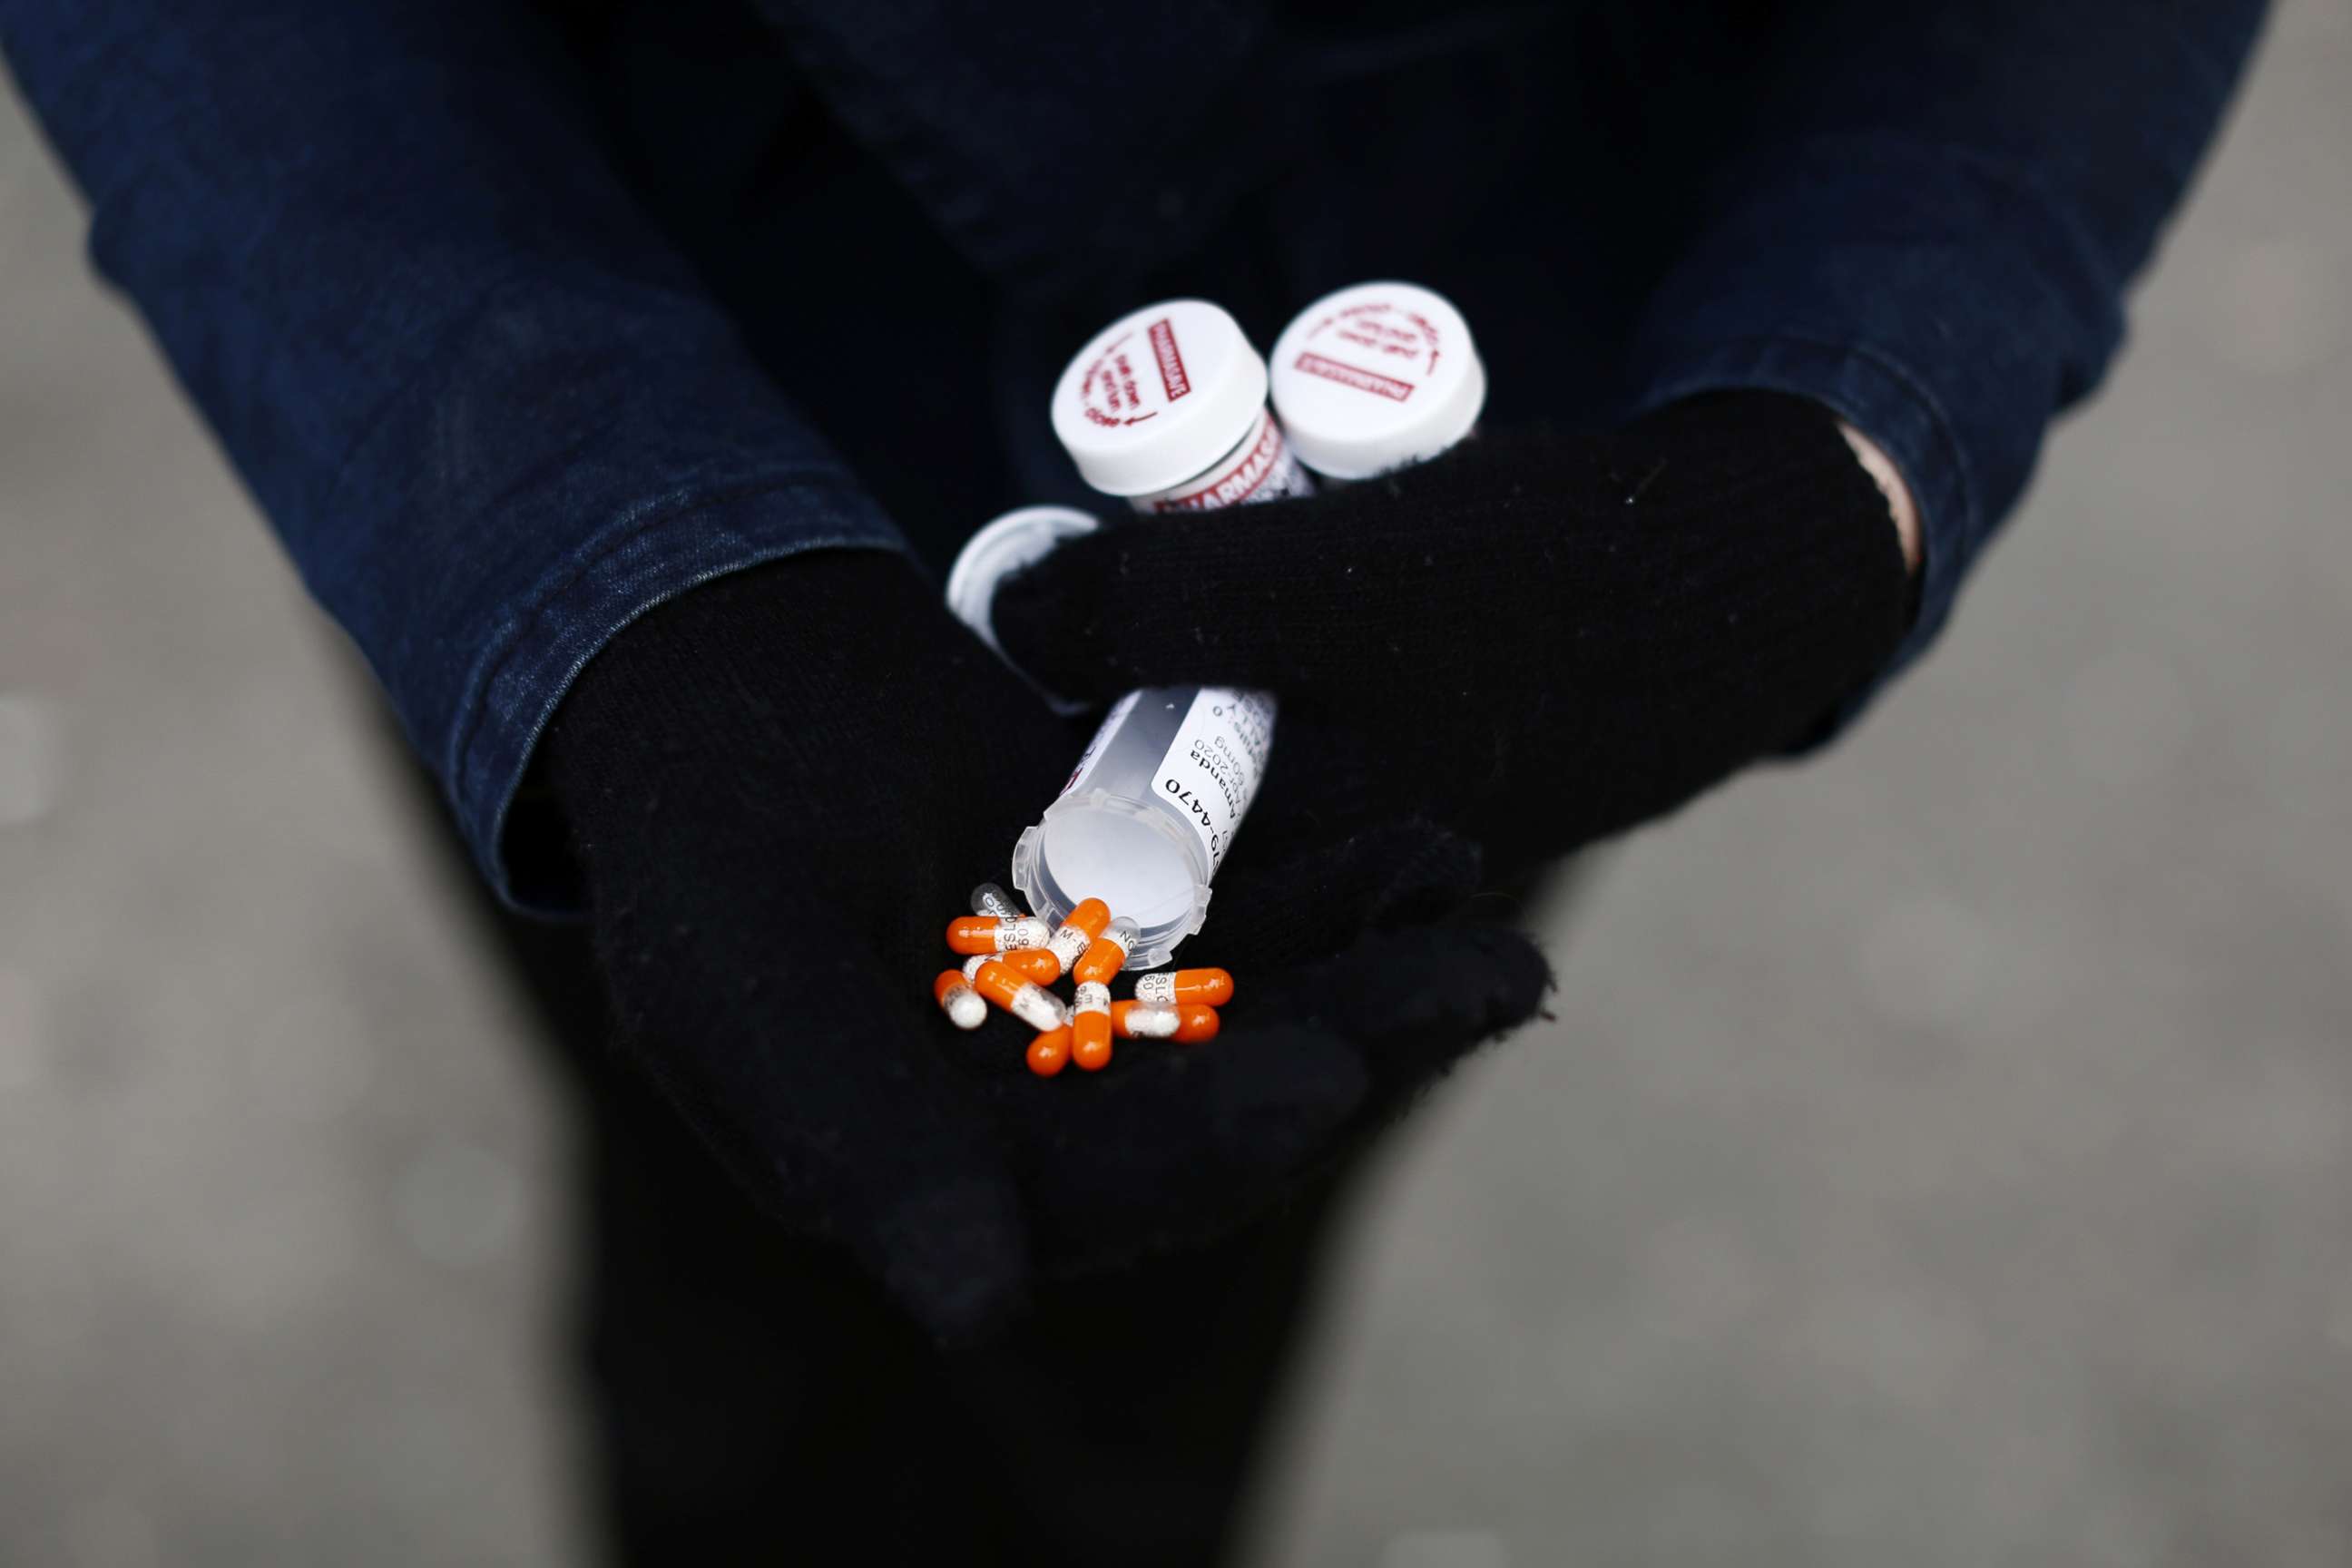 PHOTO: A fentanyl user displays a "safe supply" of opioid alternatives provided by the local health unit to combat overdoses due to poisonous additives and to support addicts during the coronavirus pandemic, April 6, 2020, in Vancouver, Canada.